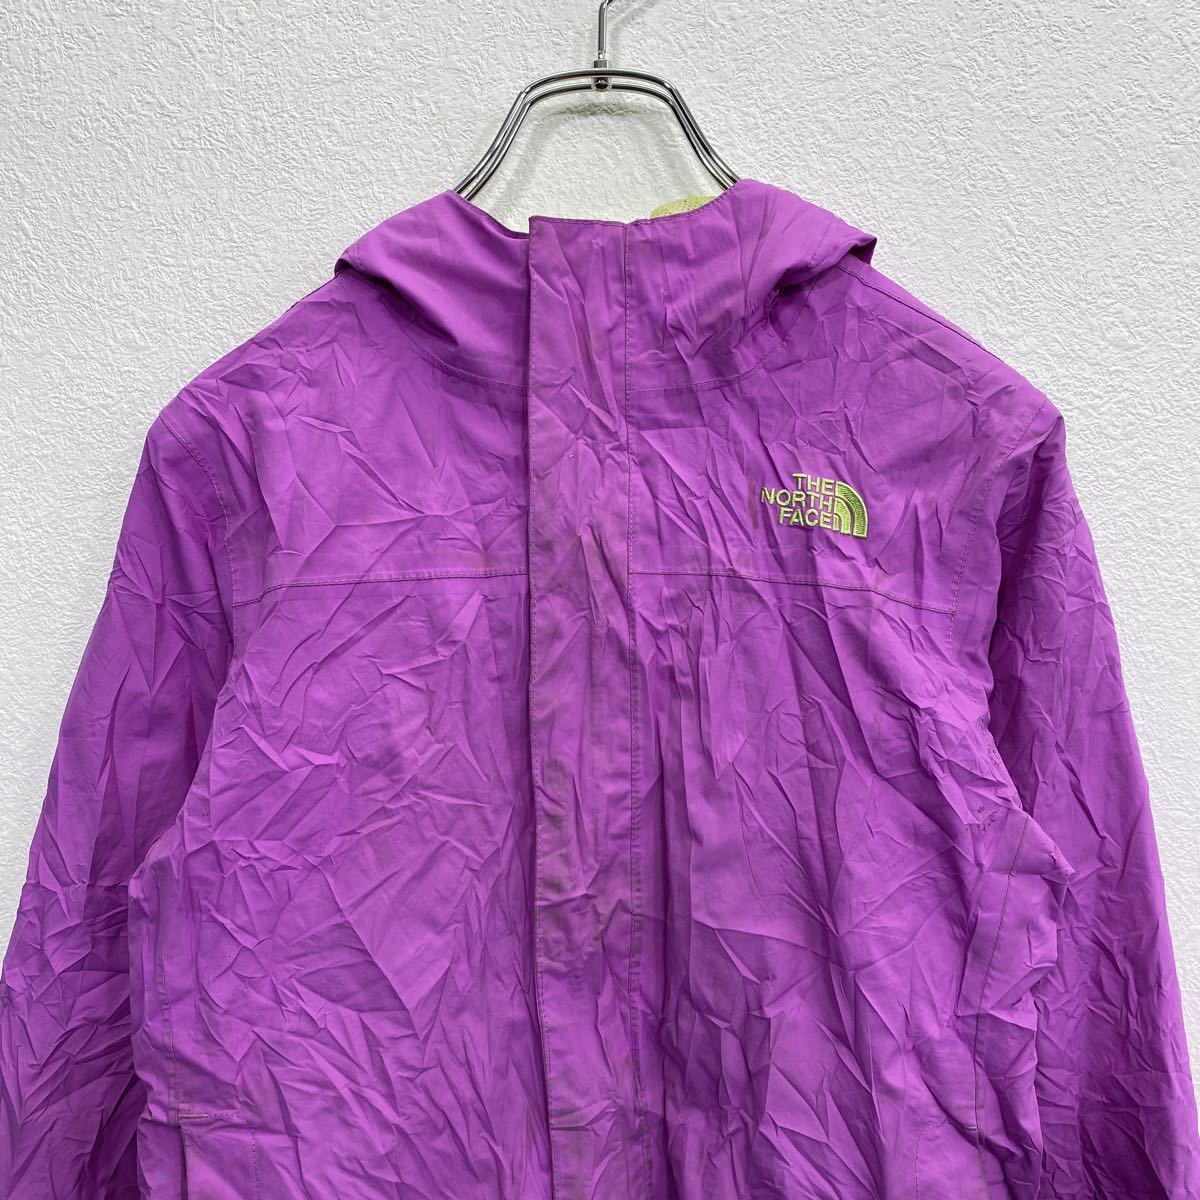 THE NORTH FACE mountain parka Kids M purple North Face nylon outdoor for children old clothes . America buying up t2201-4018